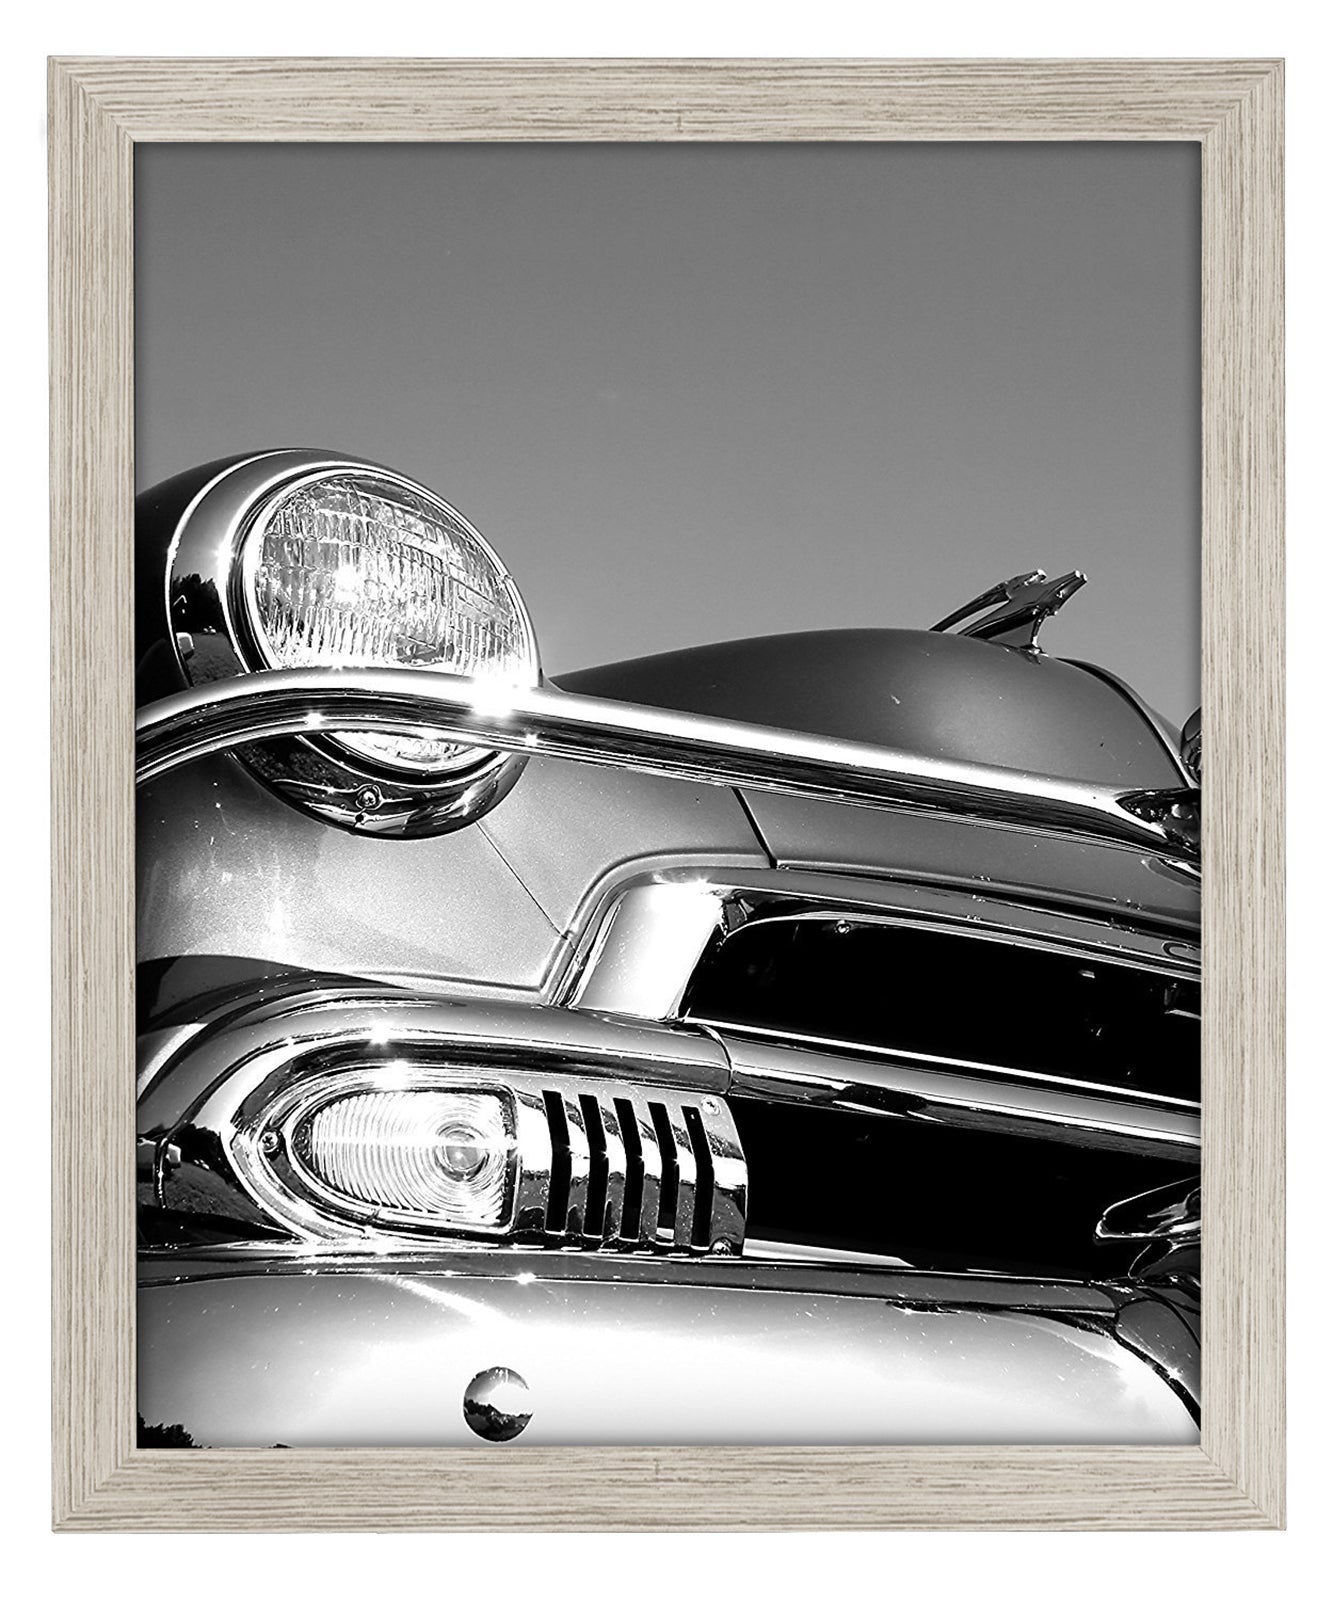 Signature Poster Frame or Picture Frame | Choose Size and Color